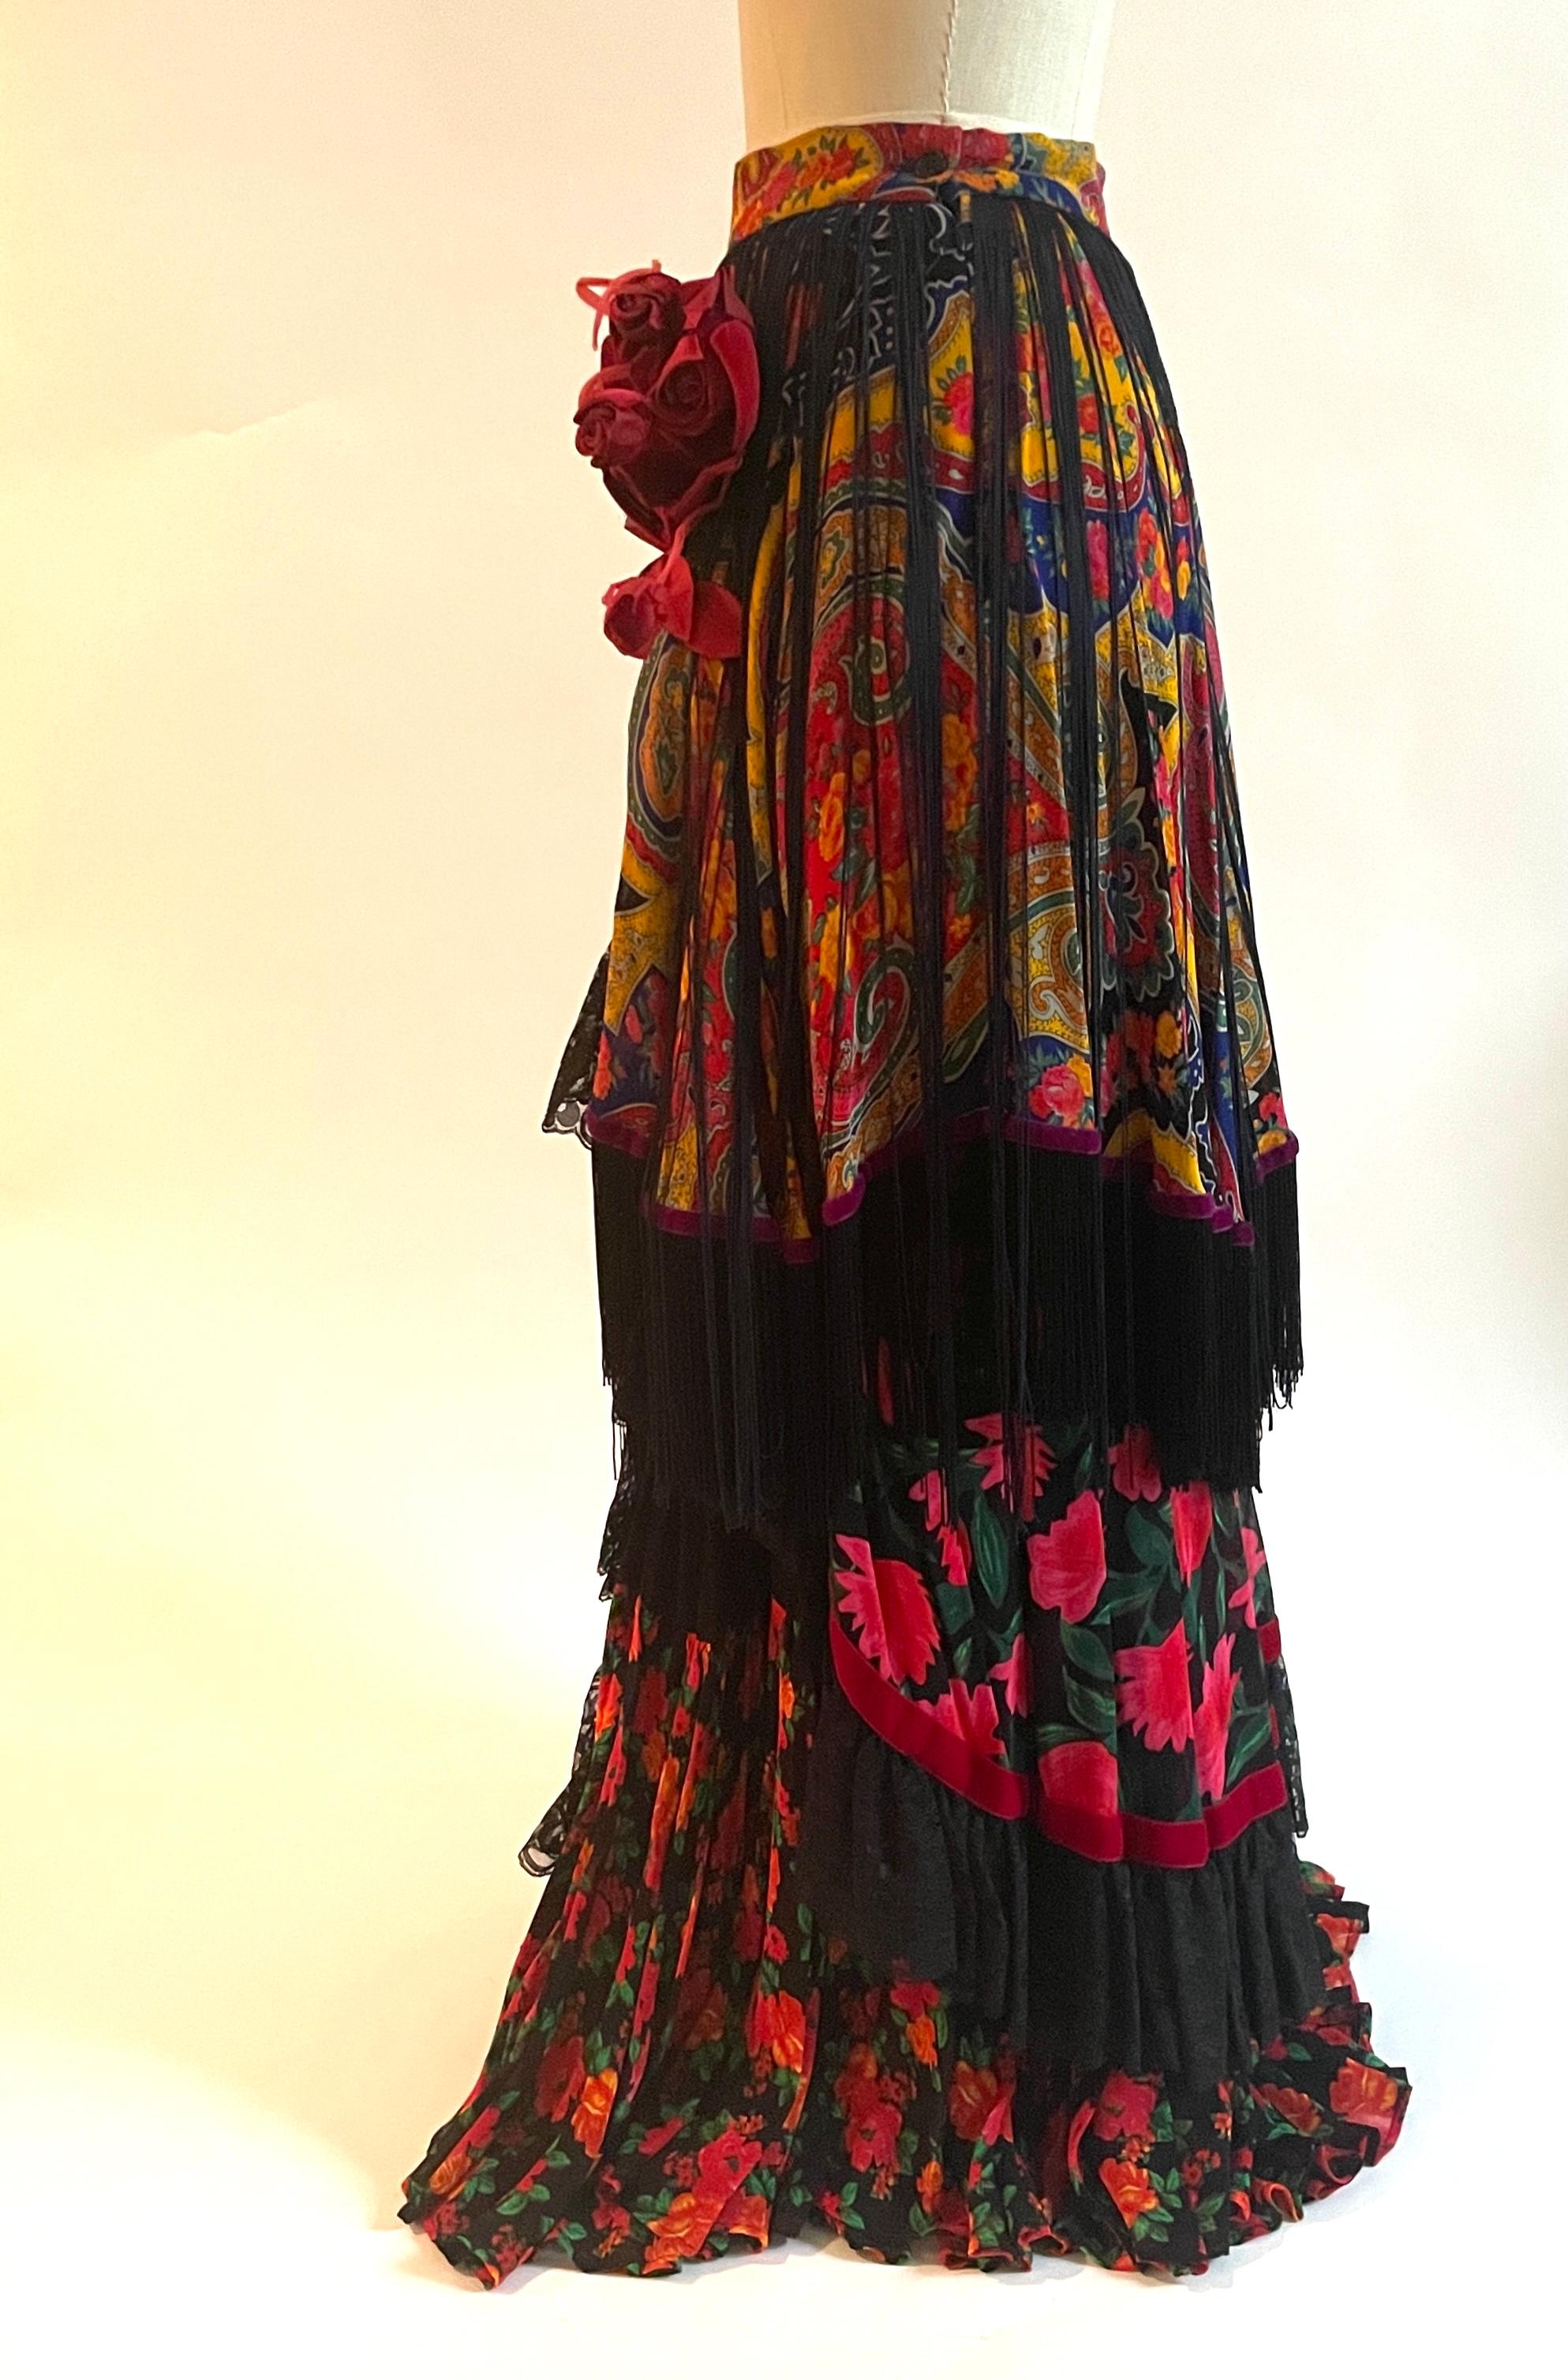 1990s Dolce and Gabbana Tiered Floral Fringe Skirt in Black Red and Yellow In Excellent Condition For Sale In San Francisco, CA